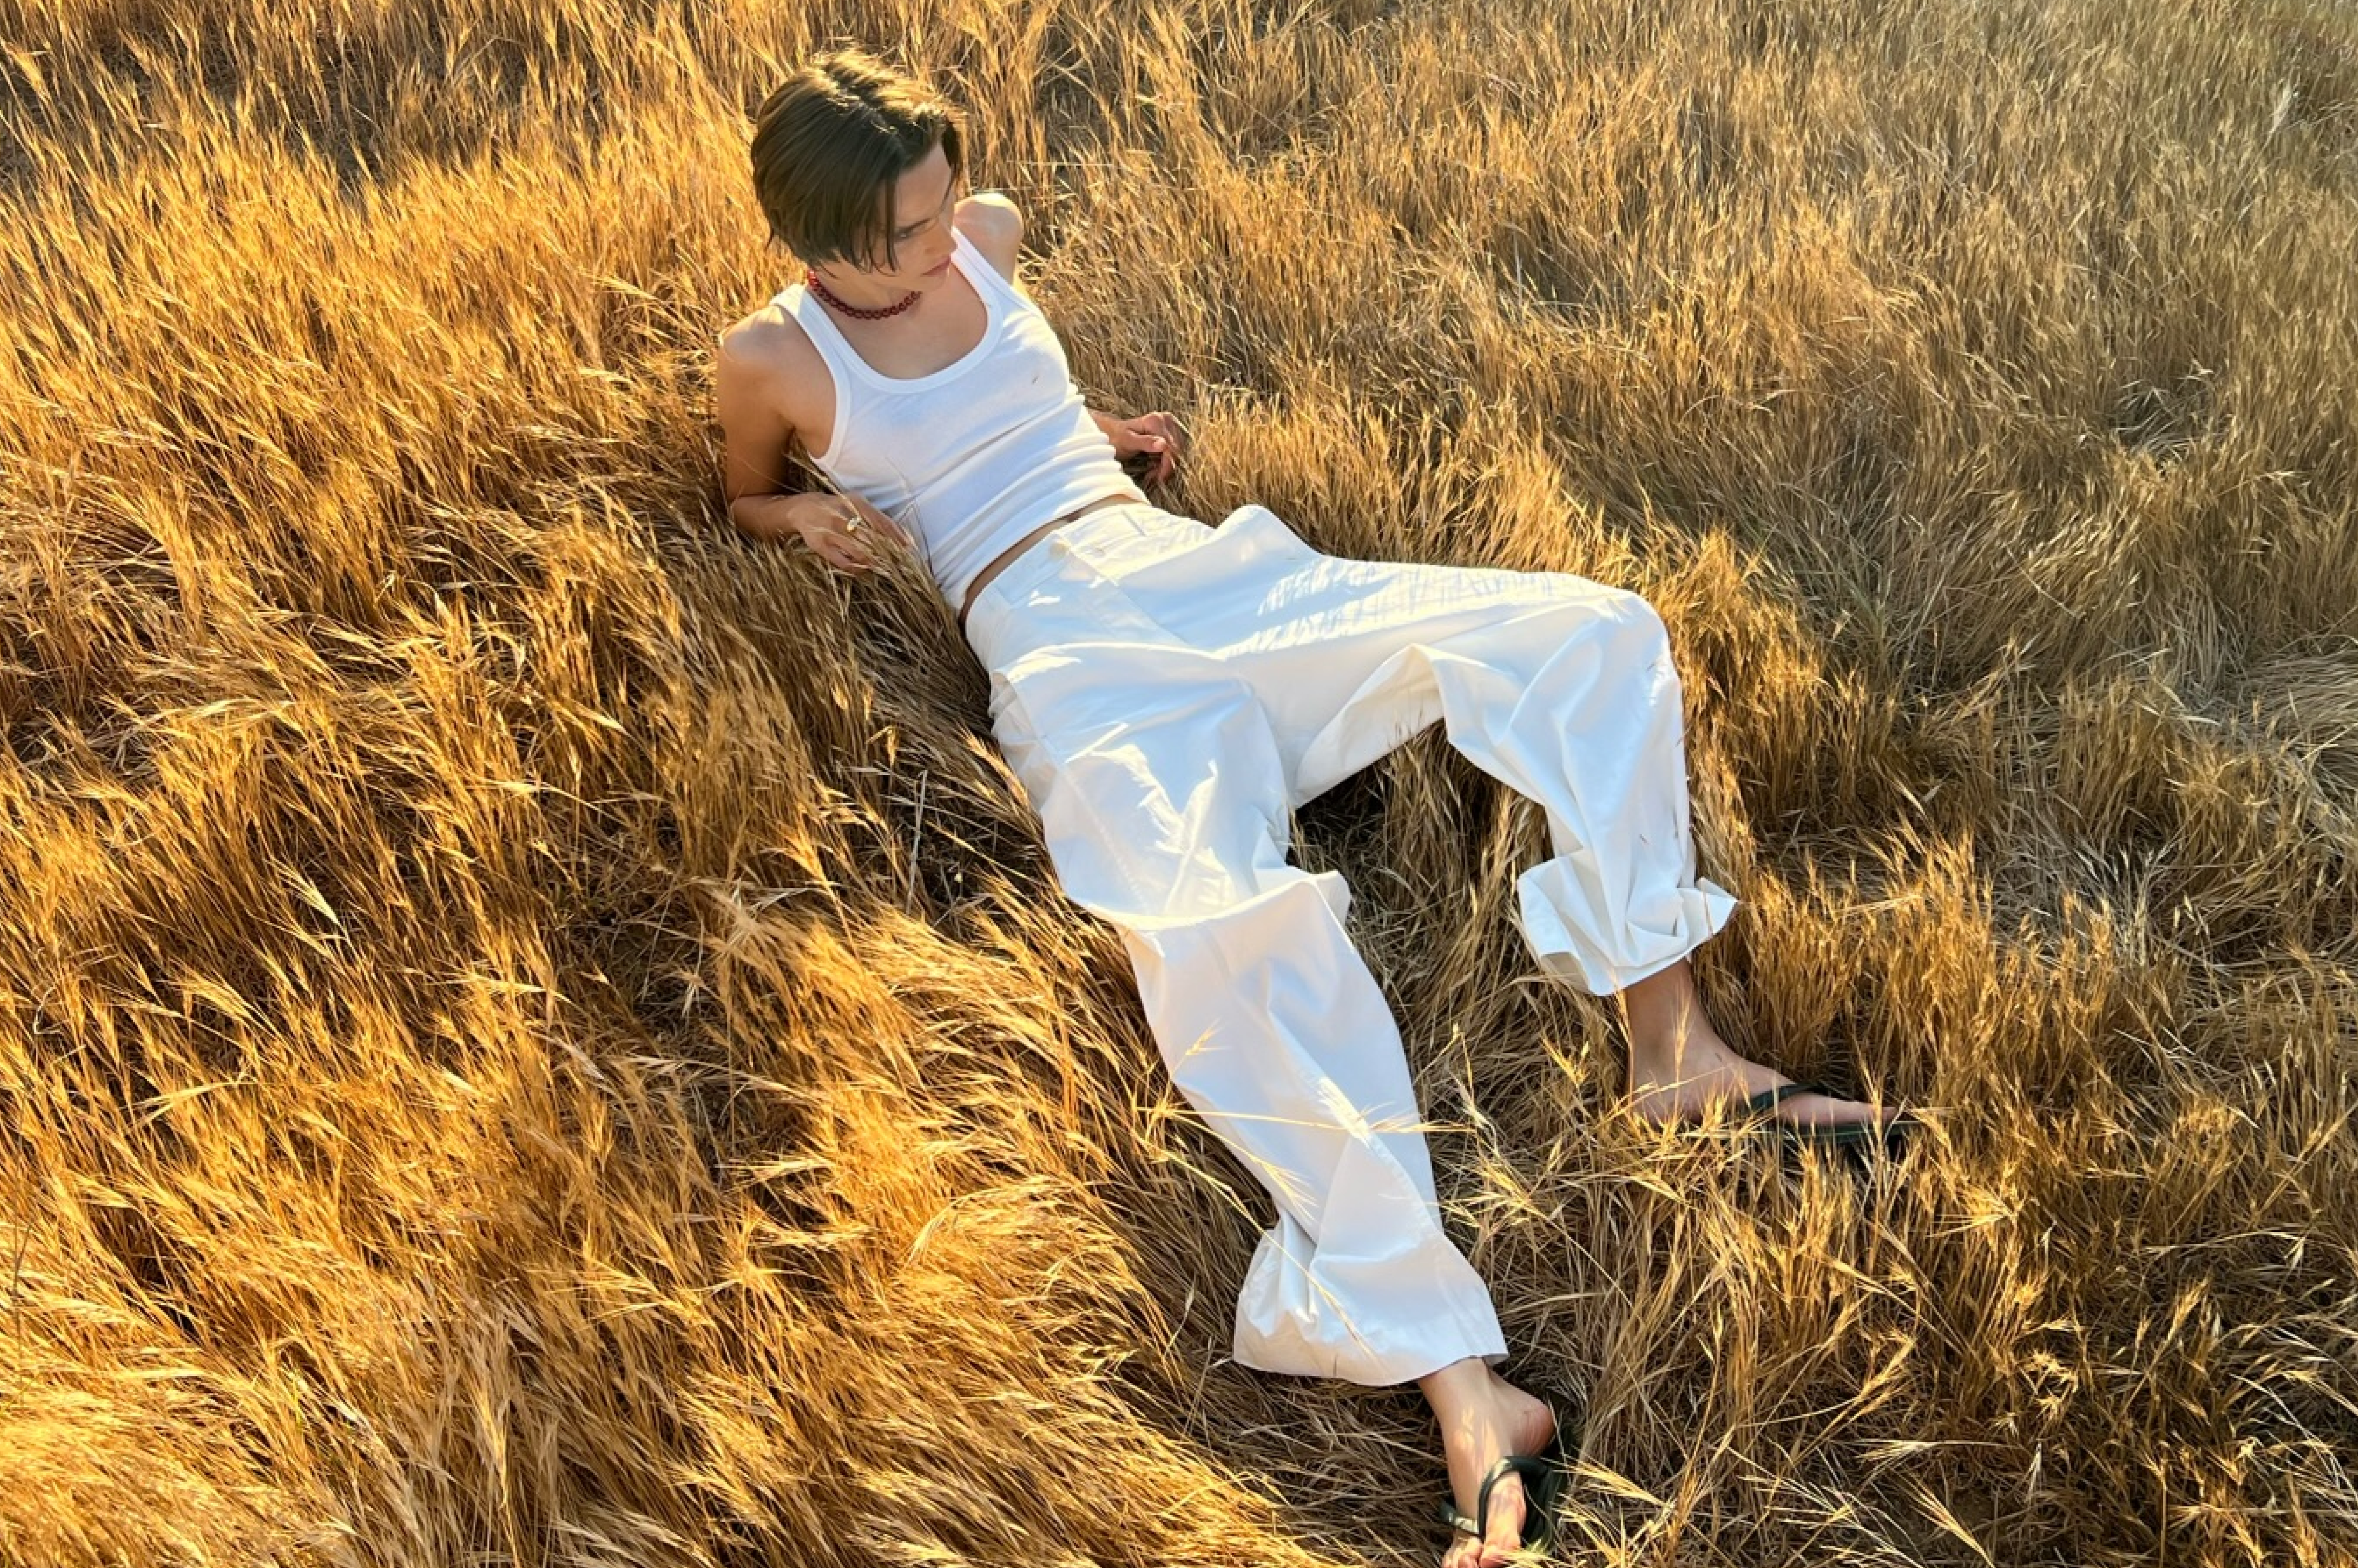 Mikkeline wearing the Rose Necklace while shooting in a golden corn field